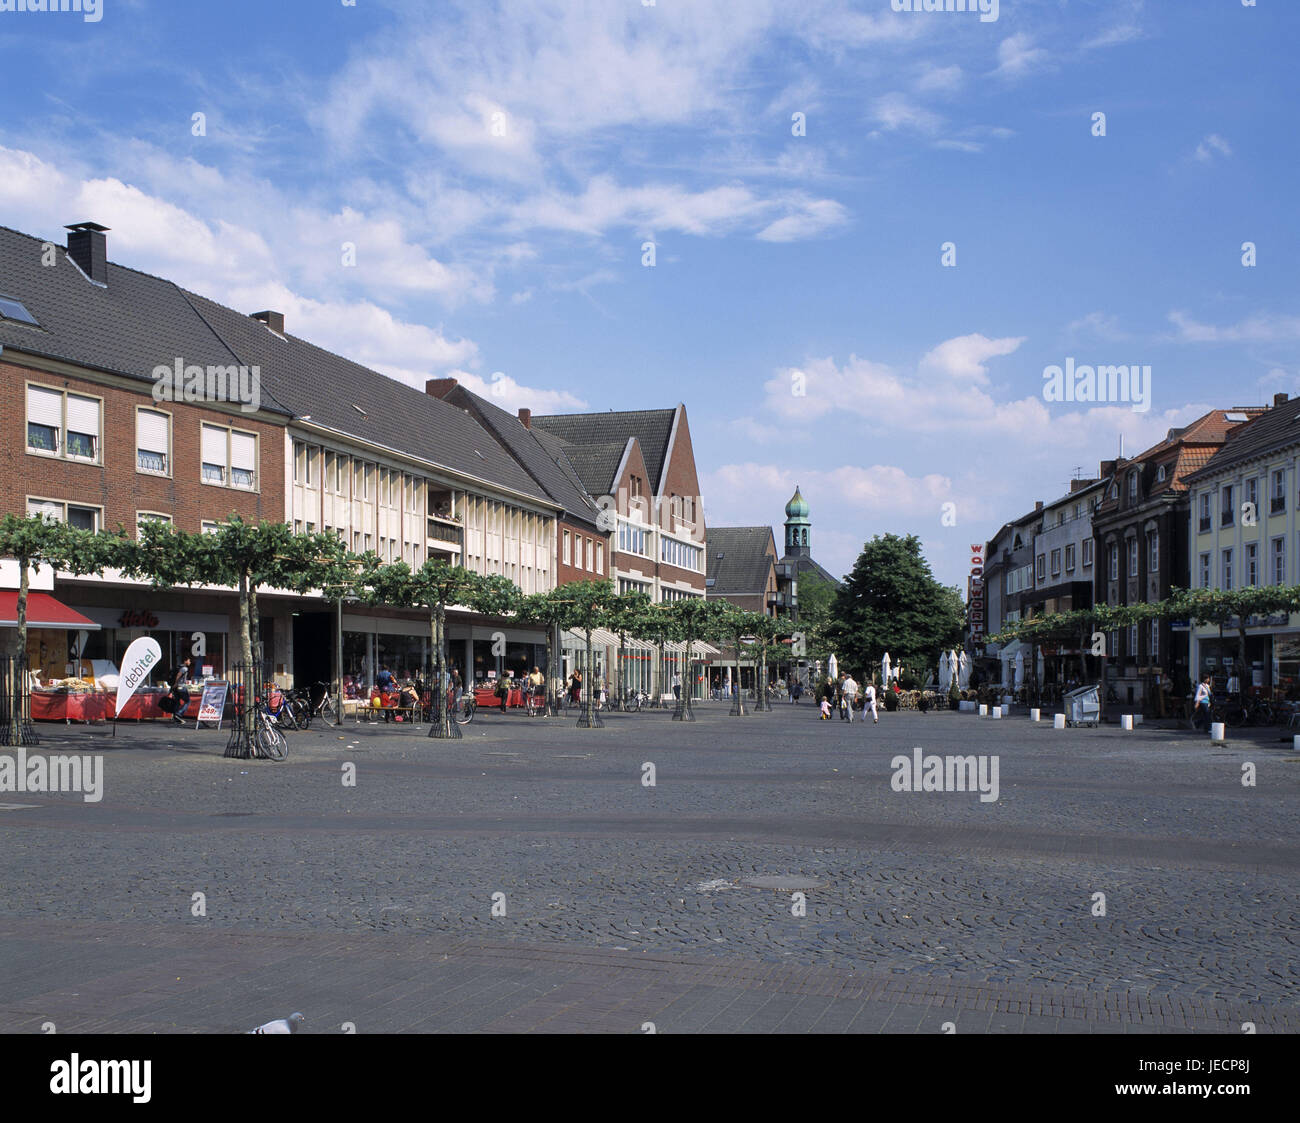 Germany, North Rhine-Westphalia, to money, marketplace, town houses, Holy Spirit church, town, city centre, square, trees, buildings, houses, architecture, pedestrian area, street cafes, the Lower Rhine, person, tourist, pedestrian, outside, Stock Photo